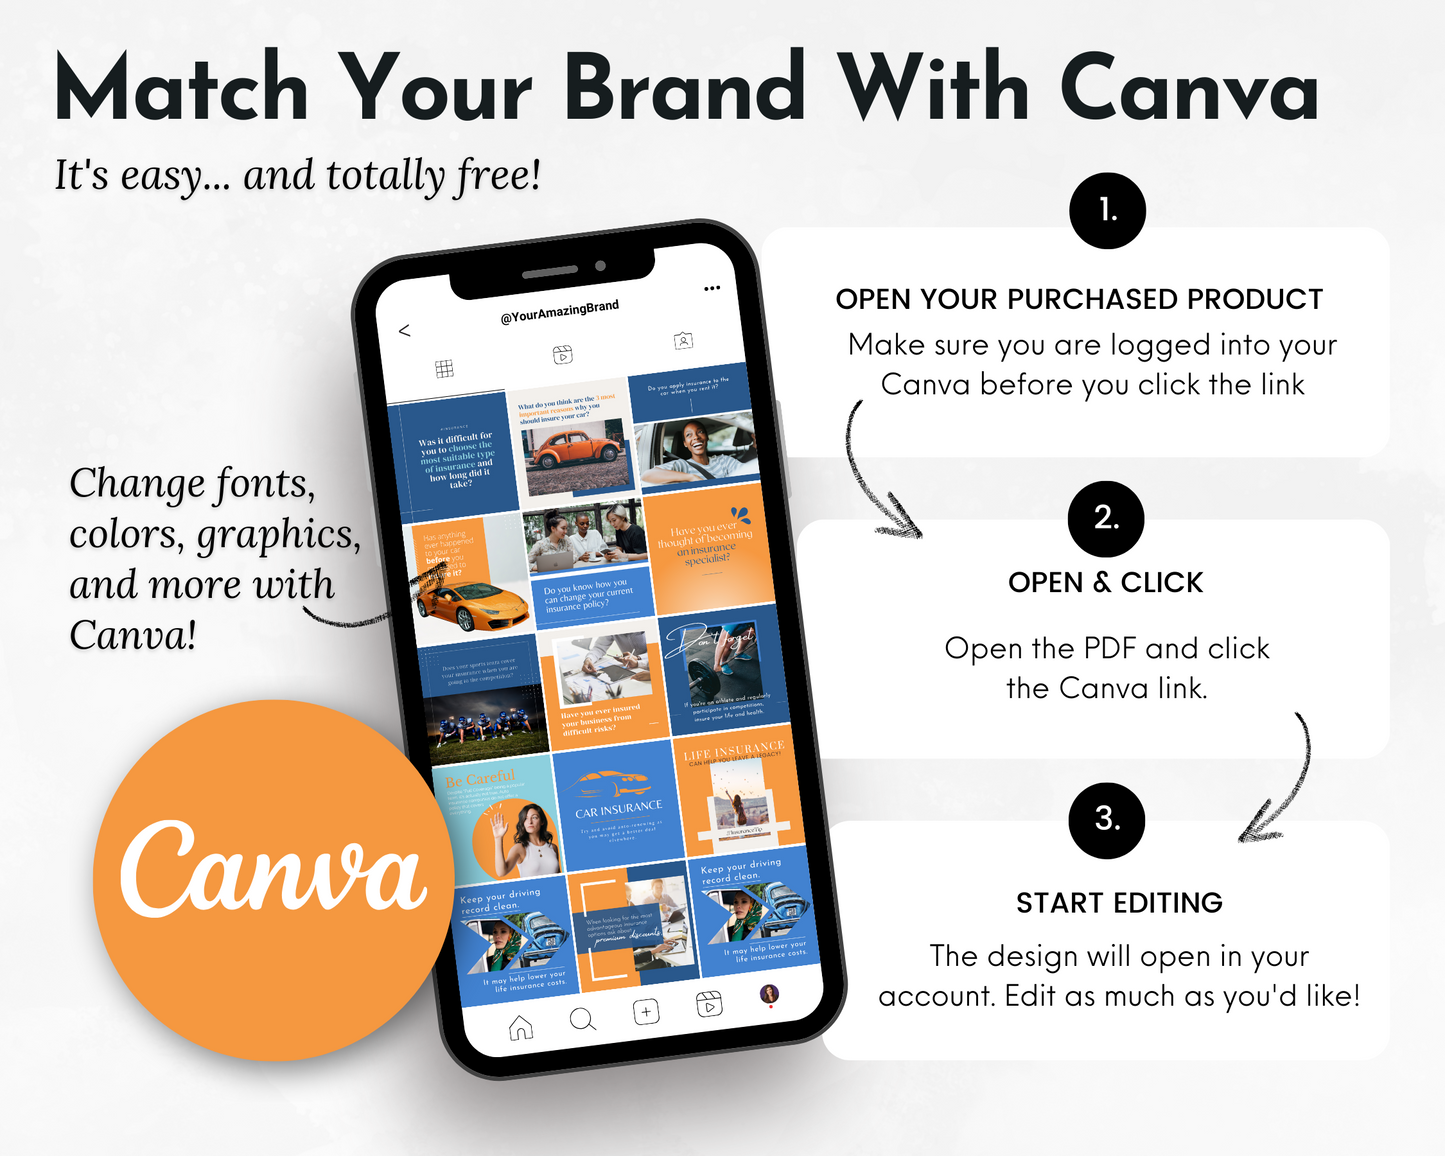 Enhance your brand's online presence by matching it with the Insurance Social Media Post Bundle and crafting captivating content using Canva templates from Socially Inclined.